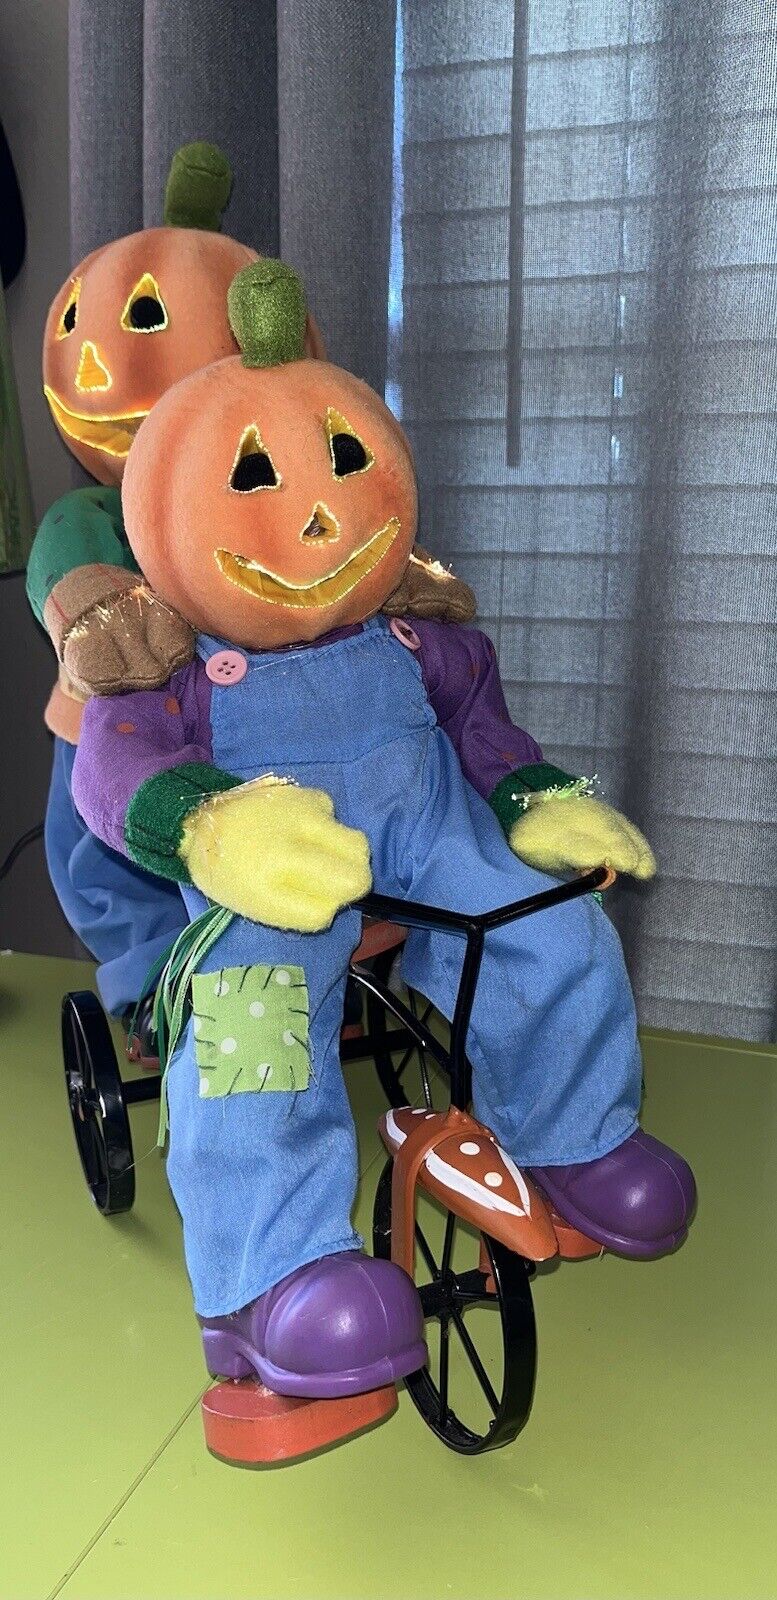 Gemmy Halloween Pumpkins Riding Tricycle Changing Color Fiber Optics Works Great